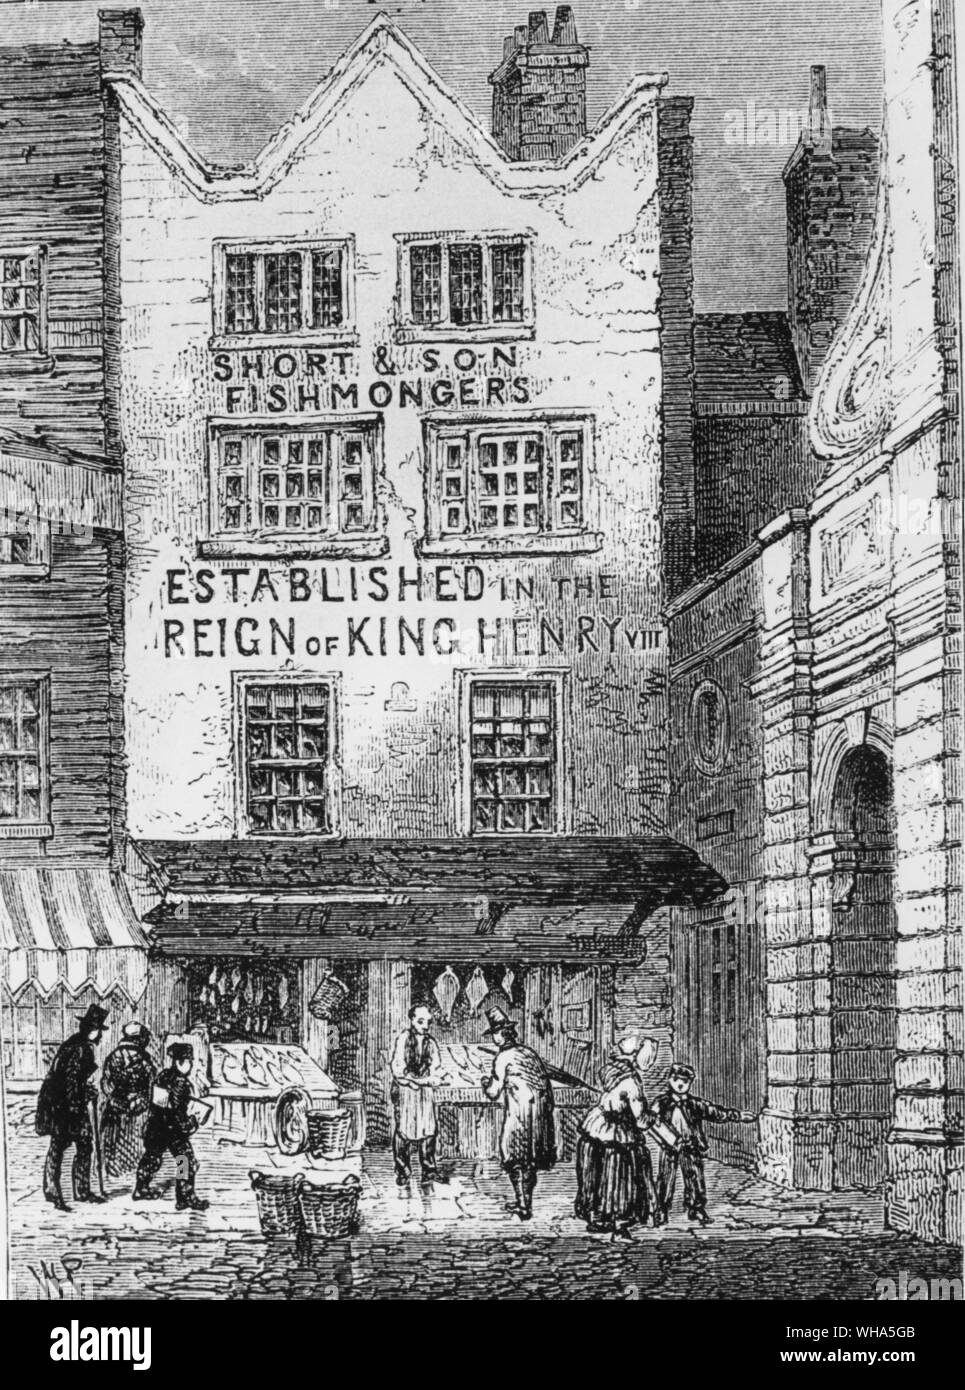 The Old Fish Shop by Temple Bar London. Established in the reign of King Henry VIII. 1846 Stock Photo